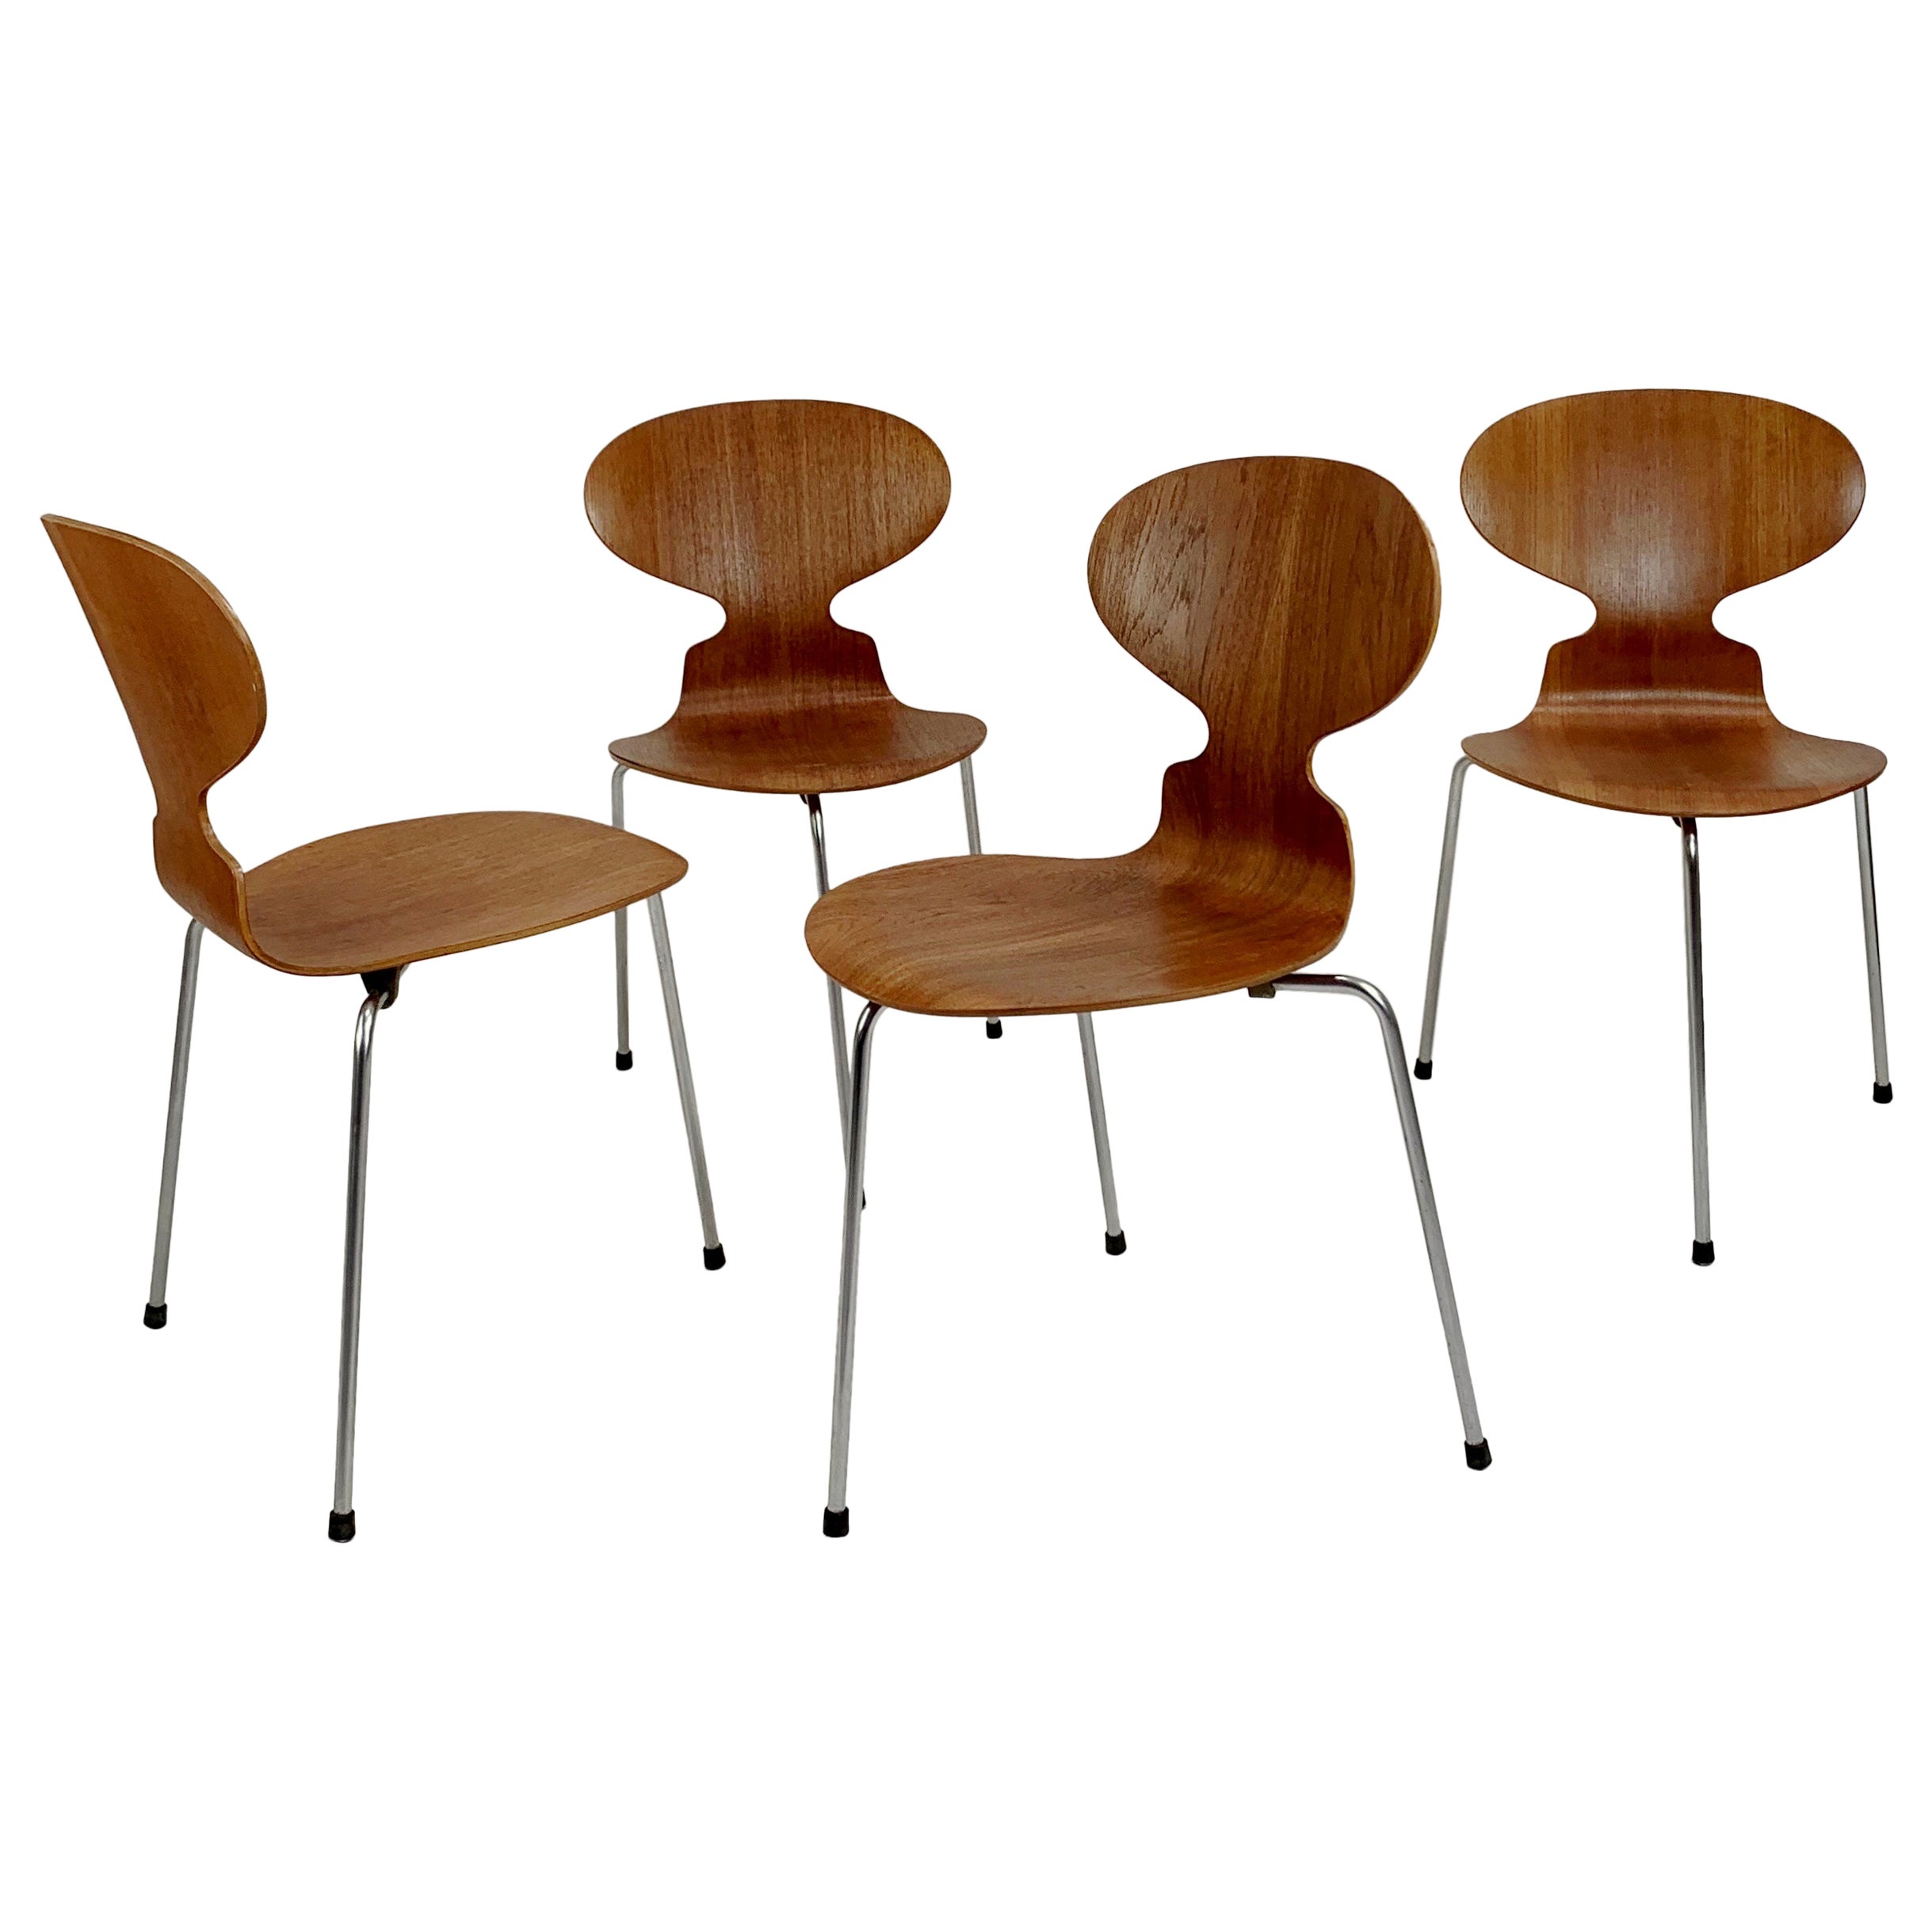 Set of four three-legged Ant chairs model 3101 by Arne Jacobsen for Fritz Hansen, circa 1960, Denmark.
Teak, steel.
Original label underneath.
Dimensions: 77 cm H, 41 cm D, 41 cm D, seat height: 43 cm .
Good condition.
All purchases are covered by